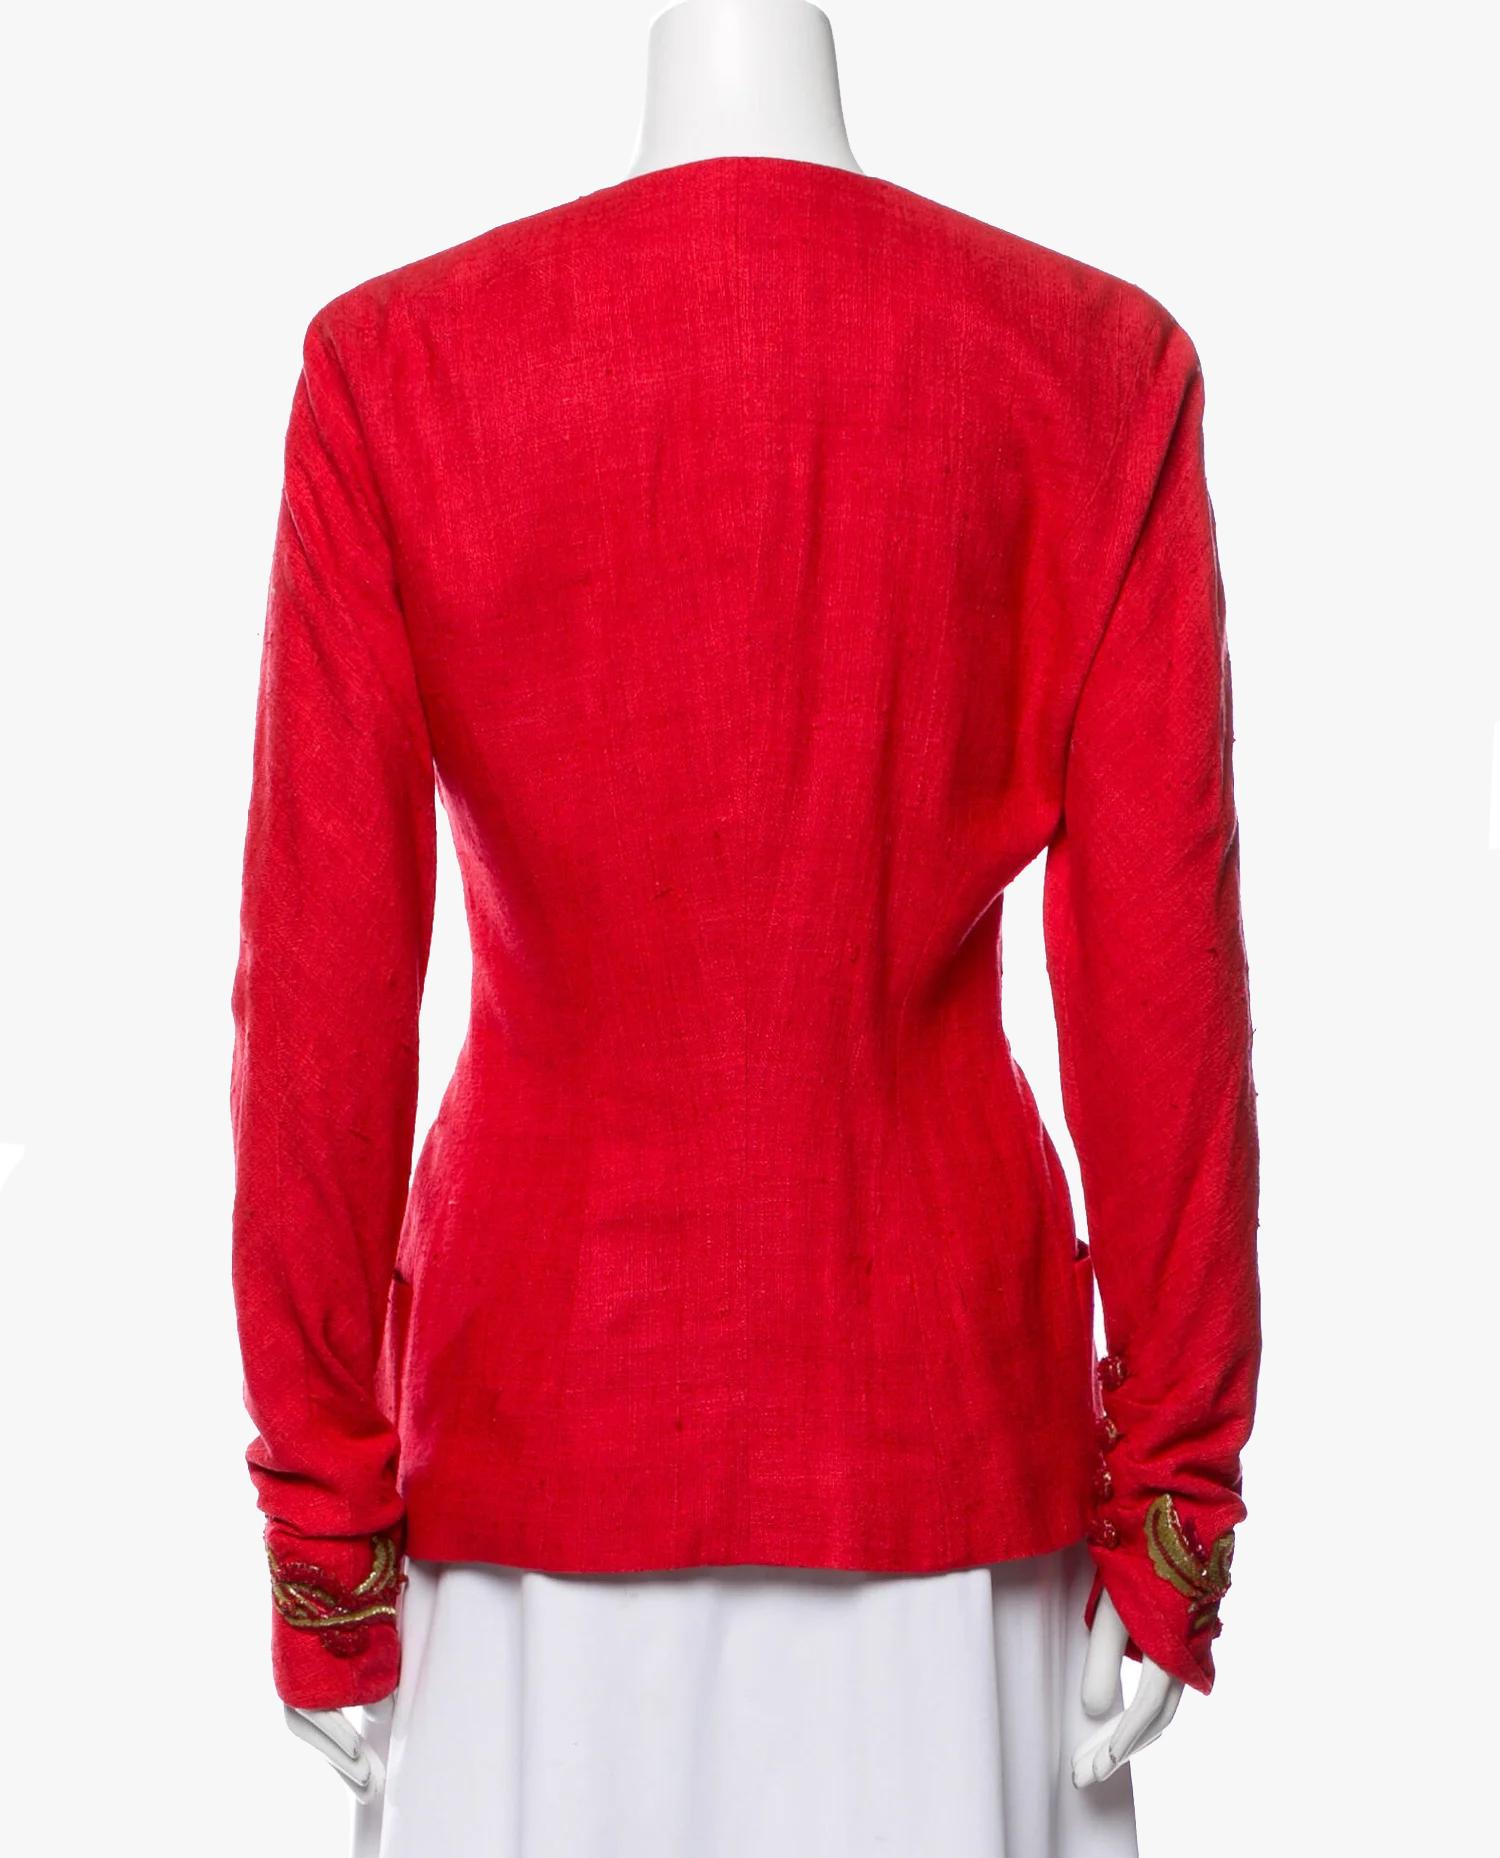 Karl Lagerfeld embroidered silk evening jacket, 1980s In Good Condition For Sale In New York, NY